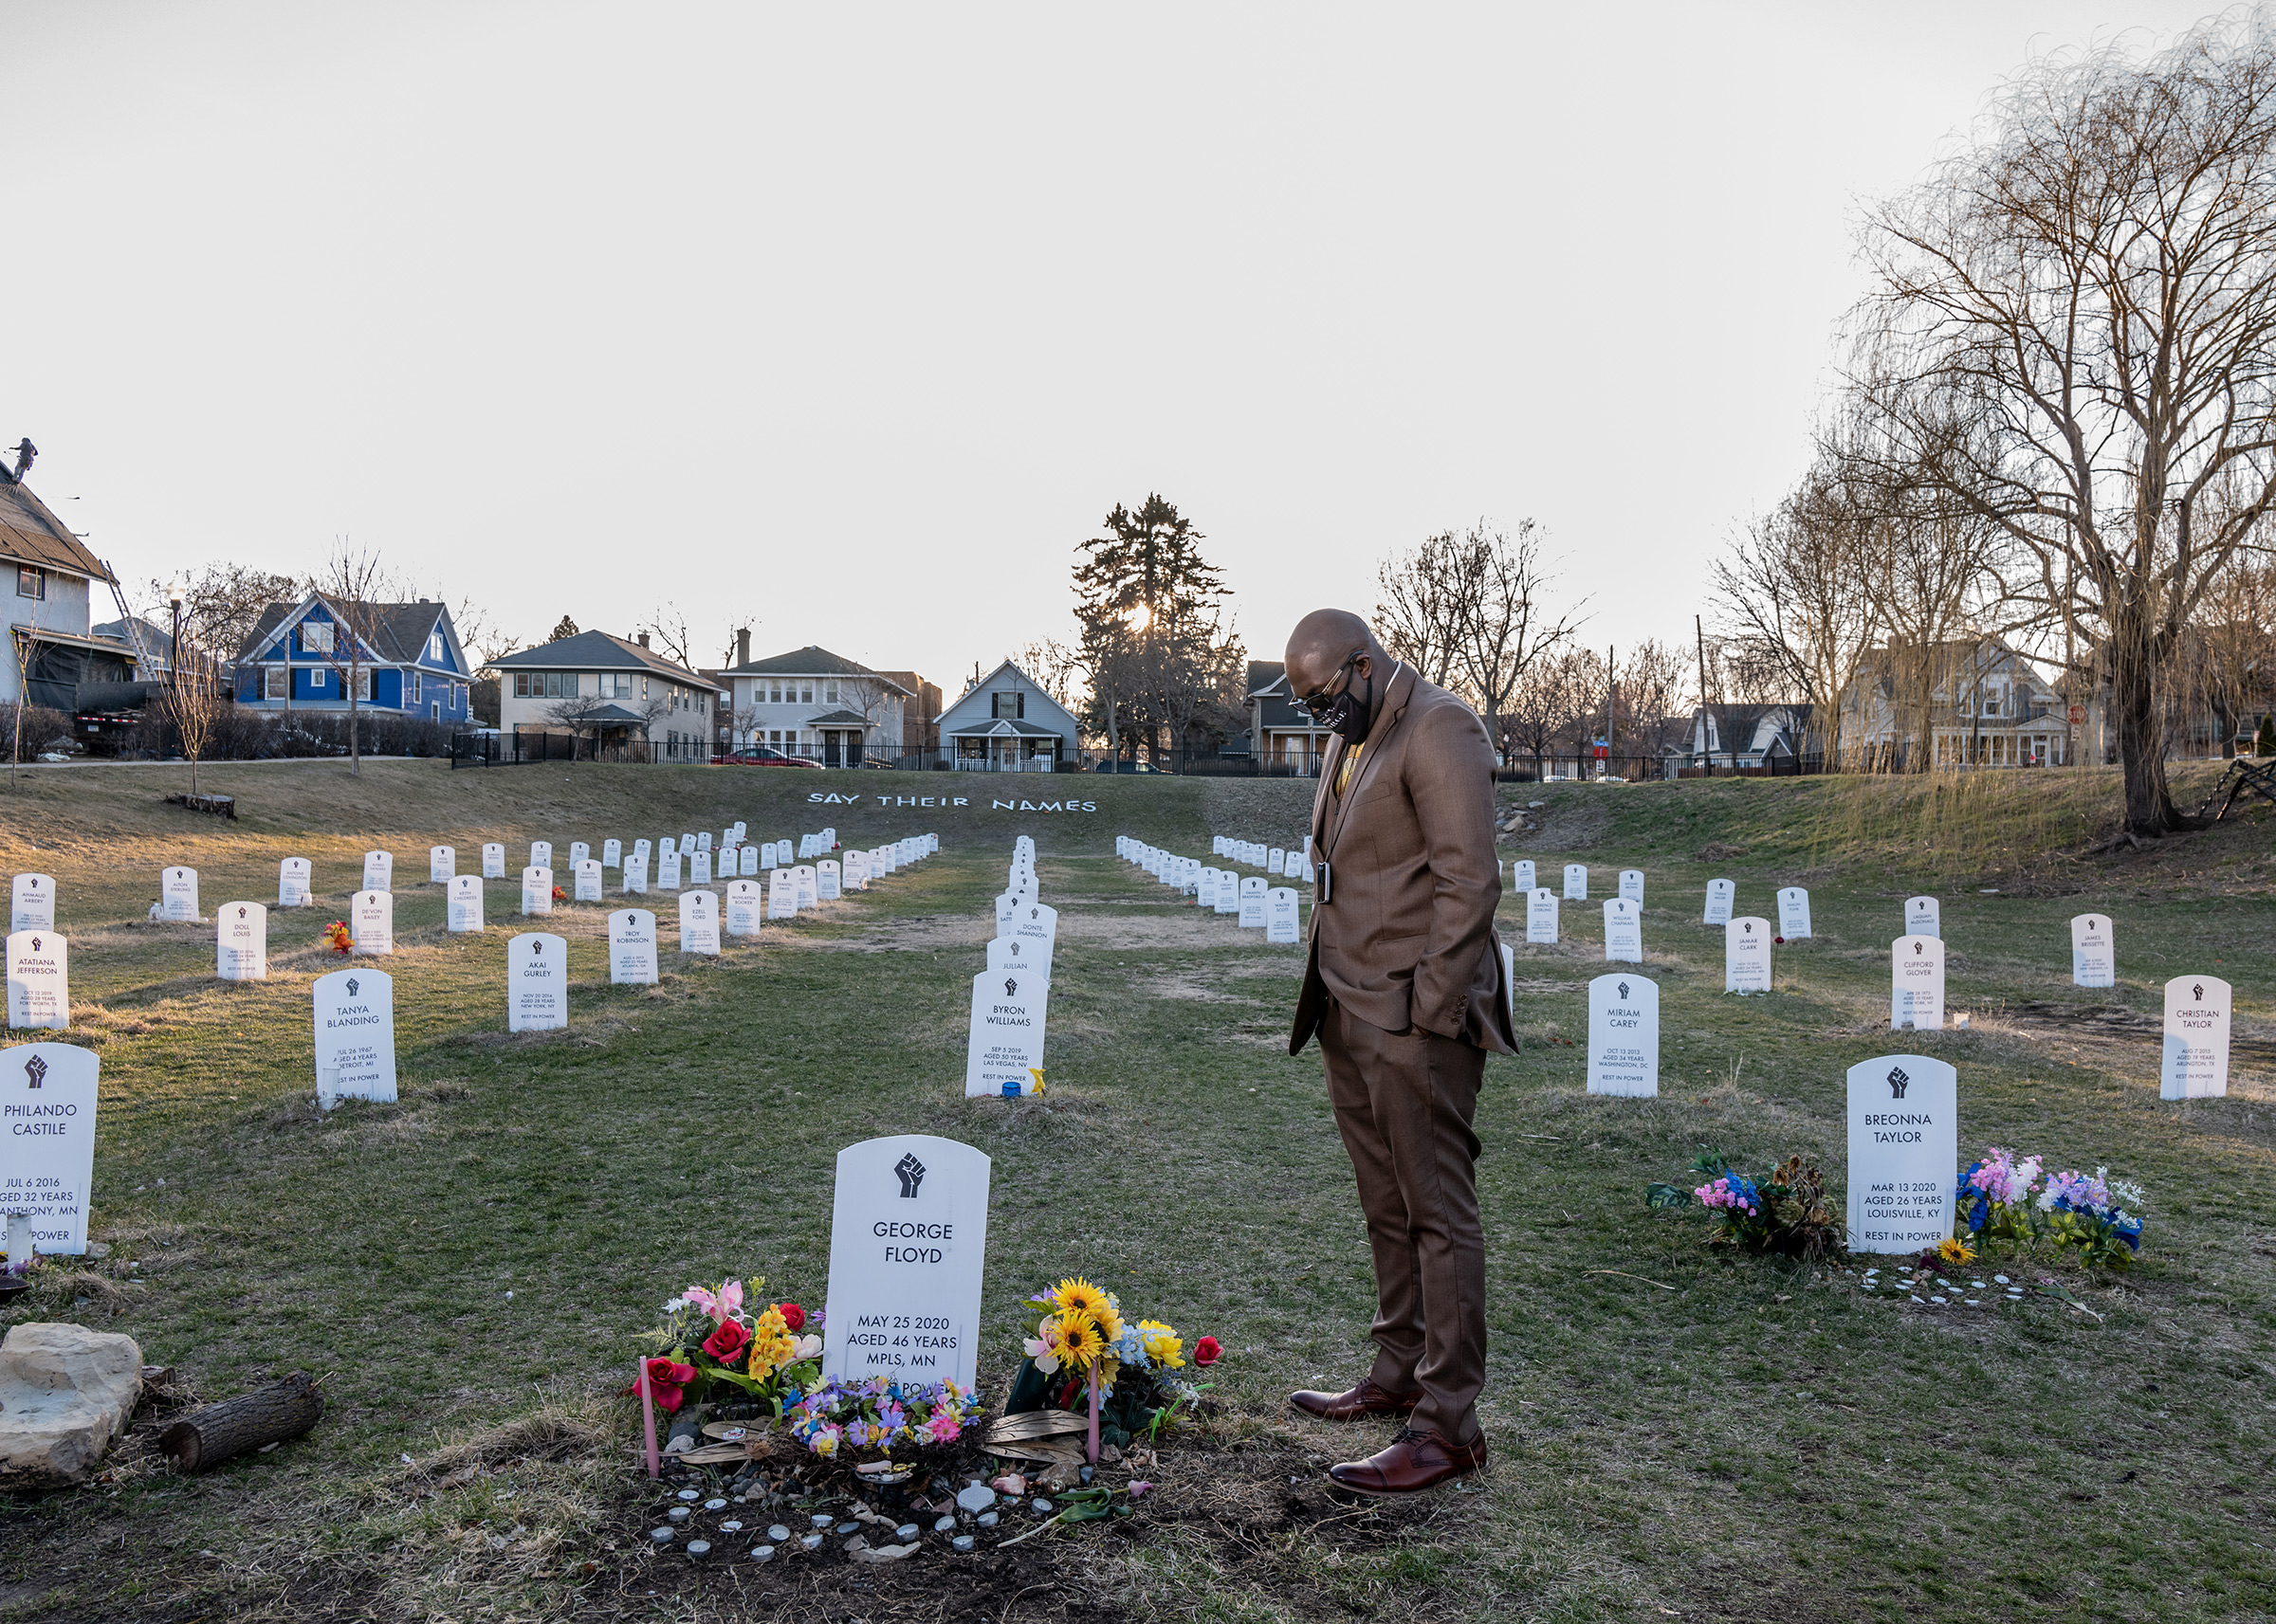 George Floyd's brother Philonise Floyd visits a protest art installation on April 1. The tombstones bear the names of Black Americans who were lynched by private citizens, fatally shot or choked by police officers, and other victims who died in police custody. (Ruddy Roye for TIME)